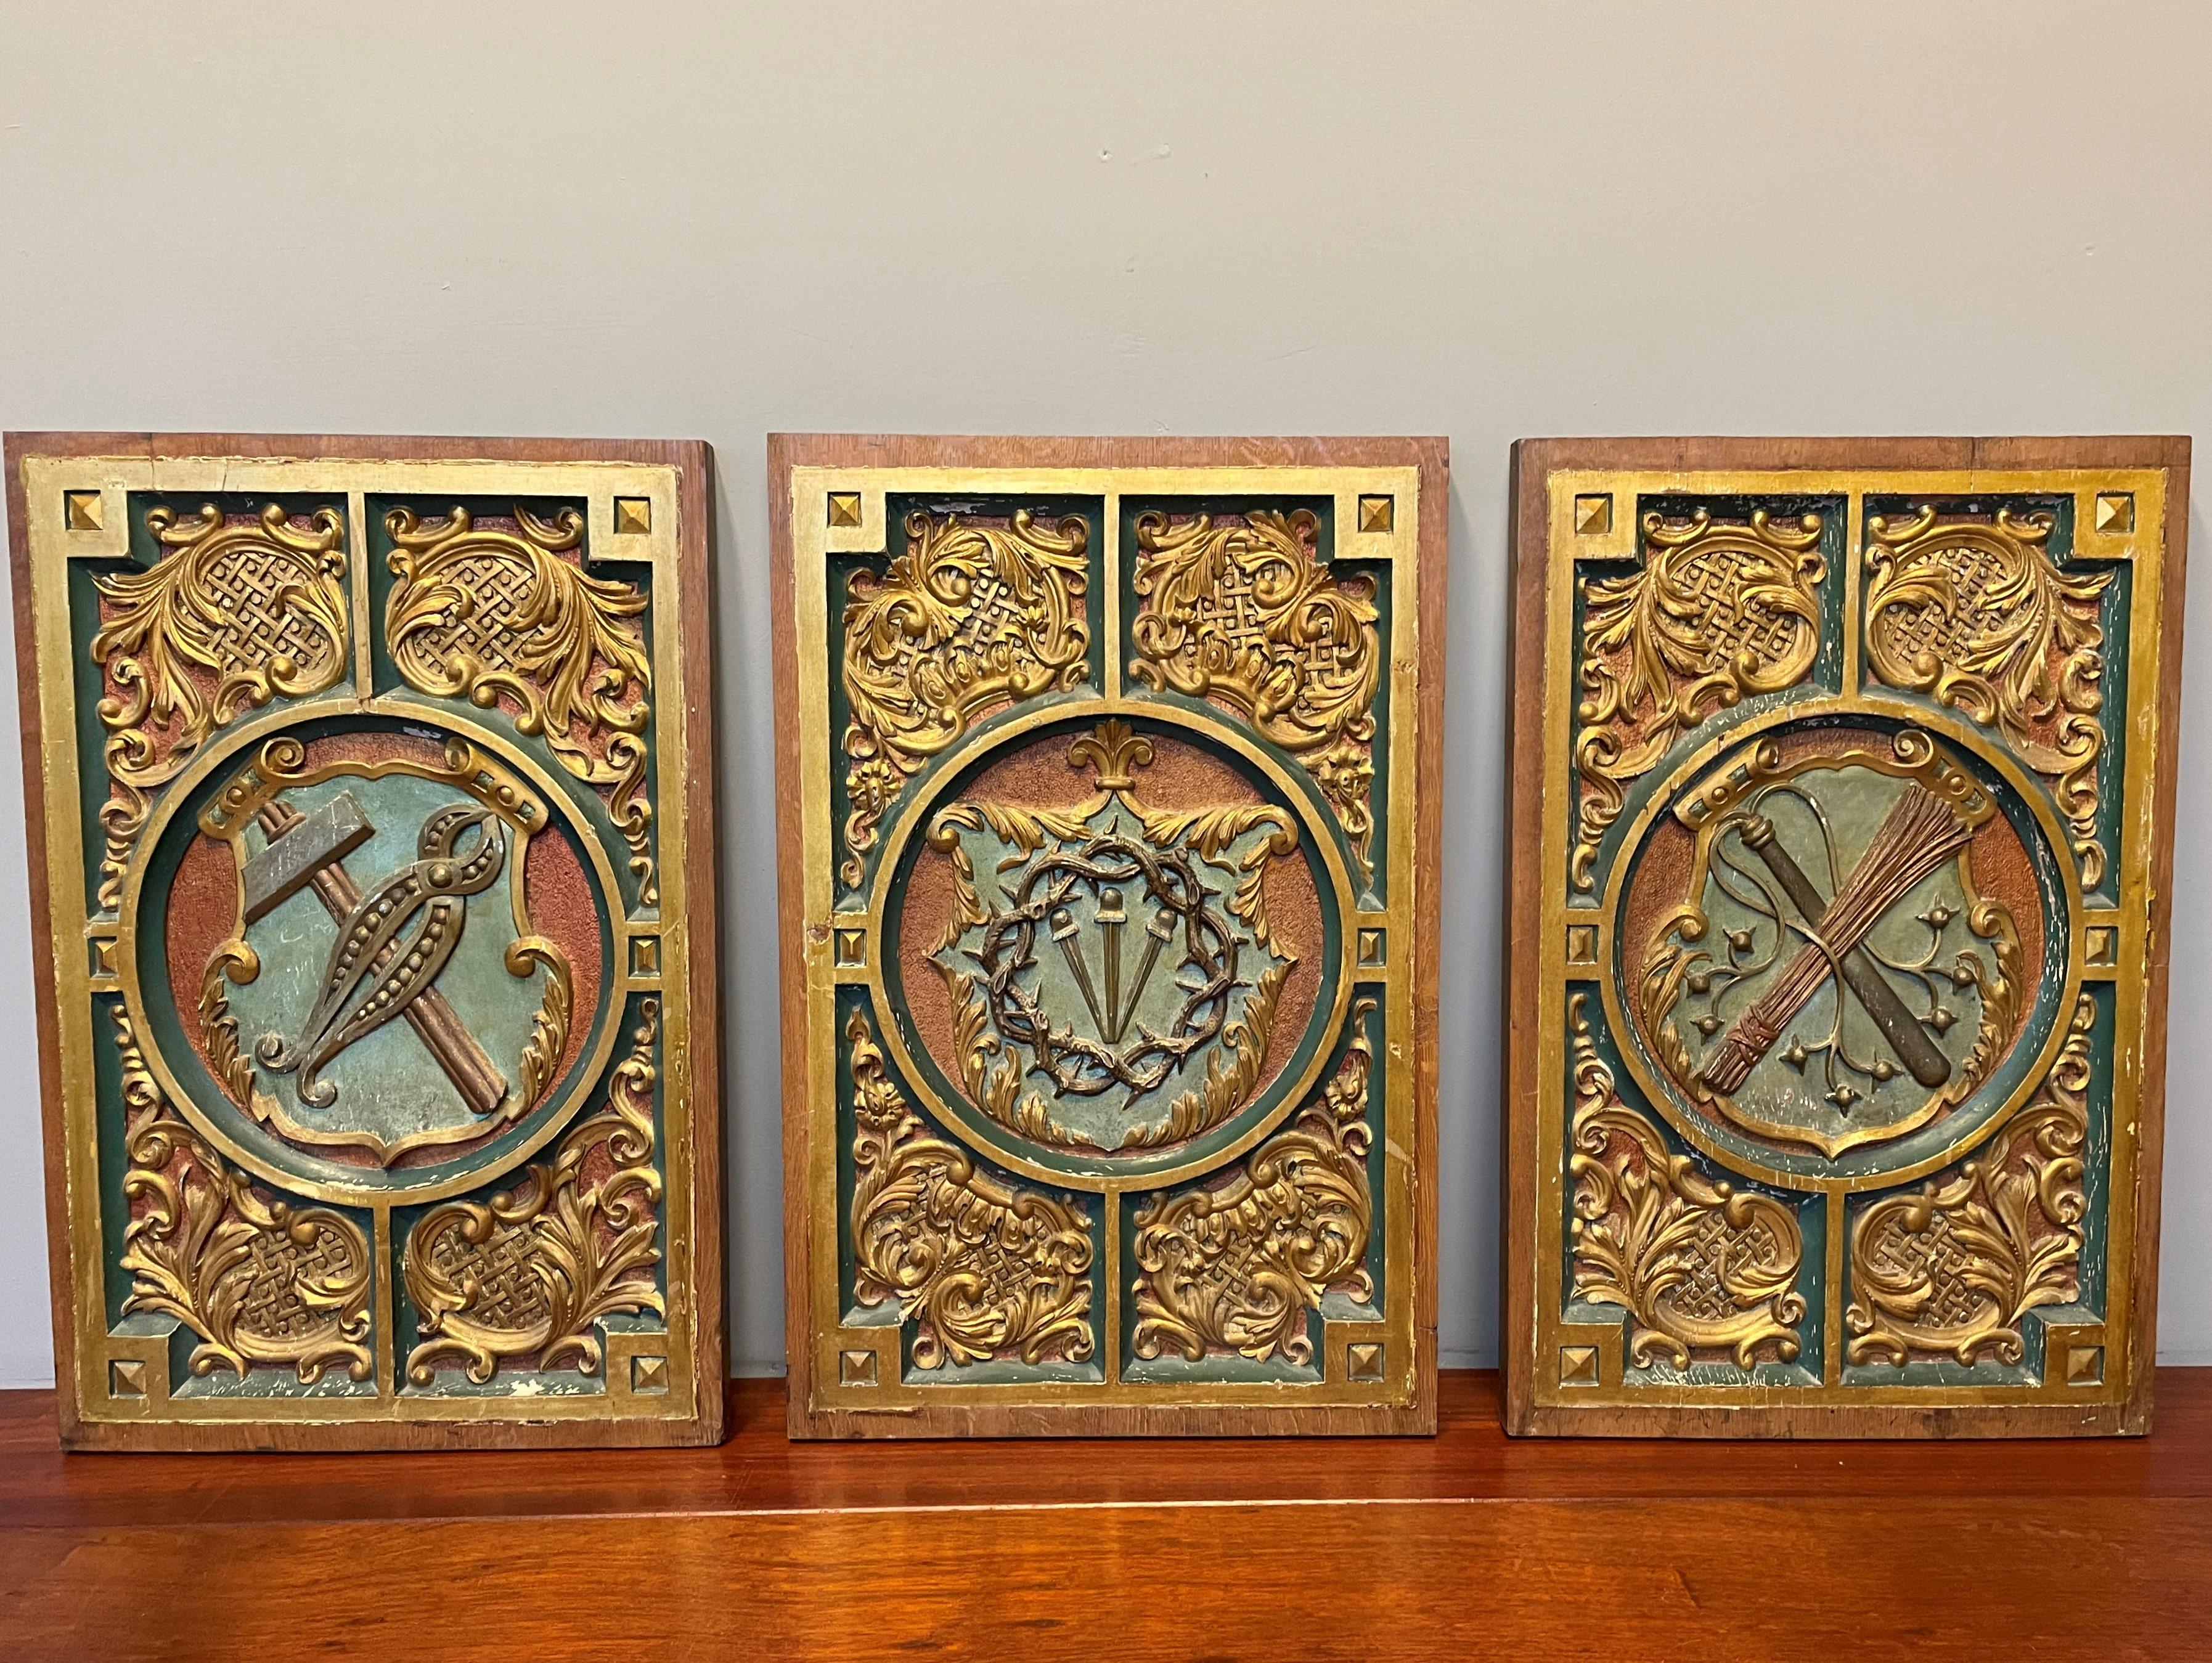 Rare and meaningful, quality hand carved Arma Christi church wall panels.

These handcrafted and meaningful 19th century church relics portray the so called 'Arma Christi' or 'Instruments of the Passion'. The objects that are hand carved and hand